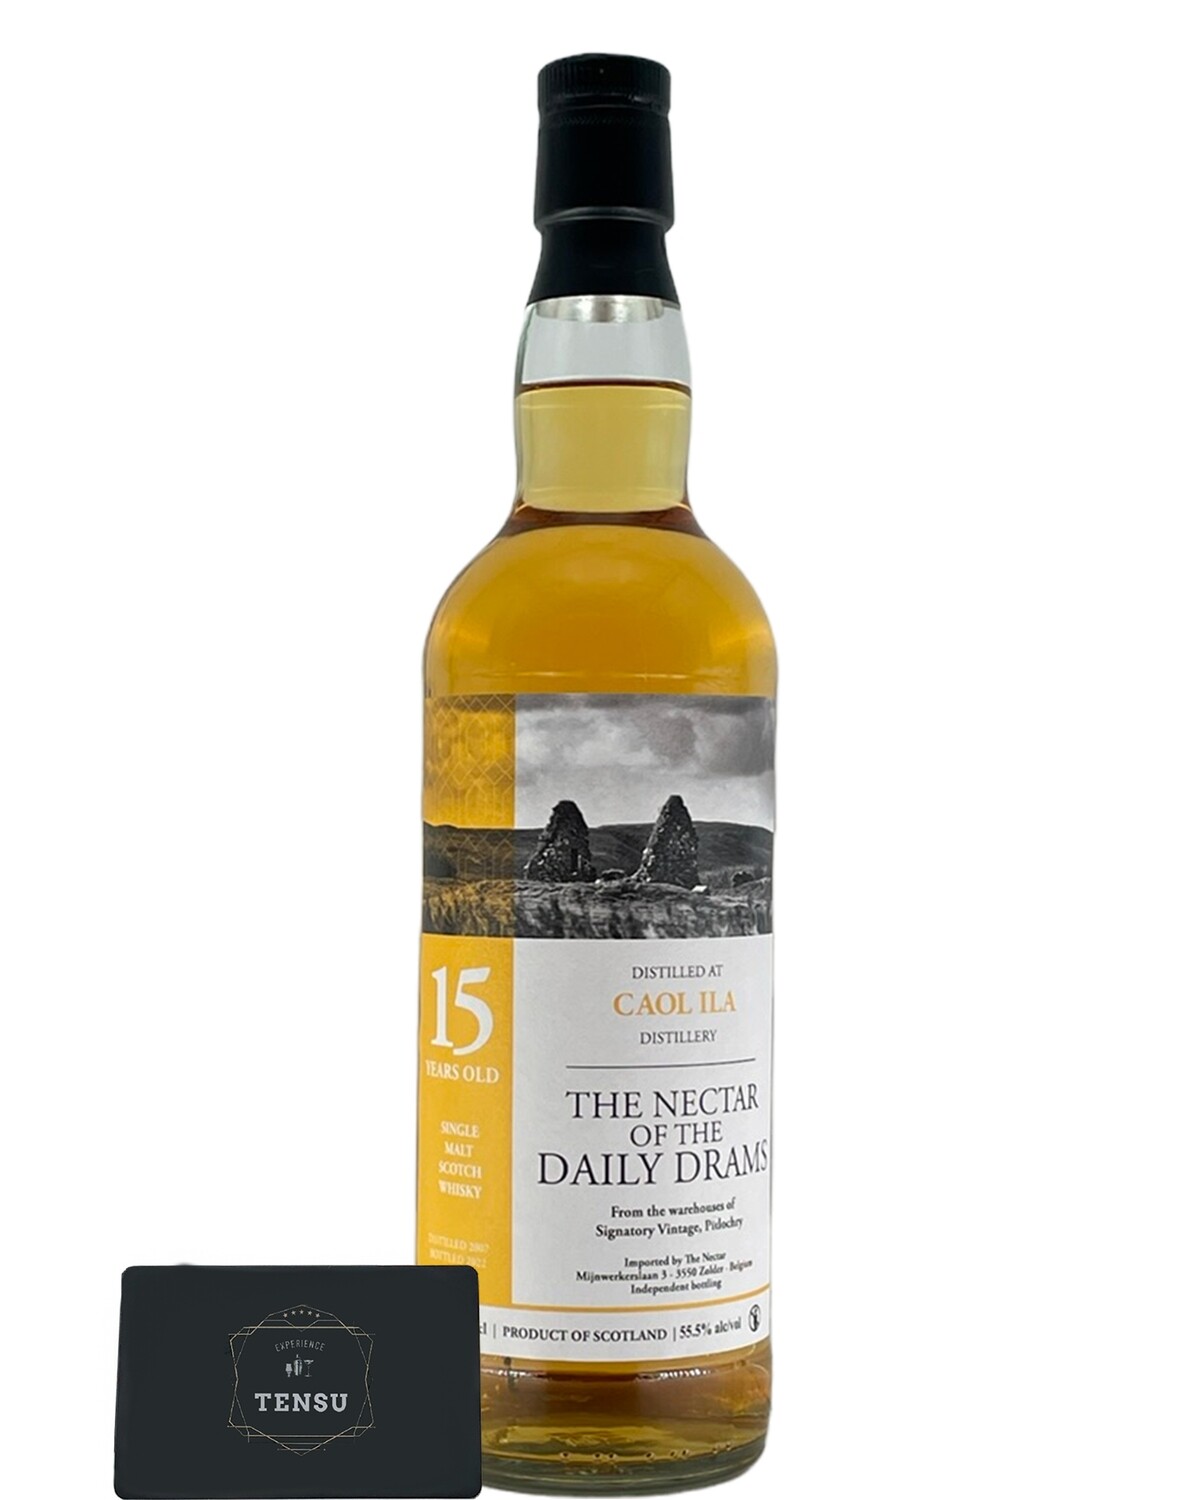 Caol Ila 15 Years Old (2007-2022) 55.5 Daily Drams "The Nectar"